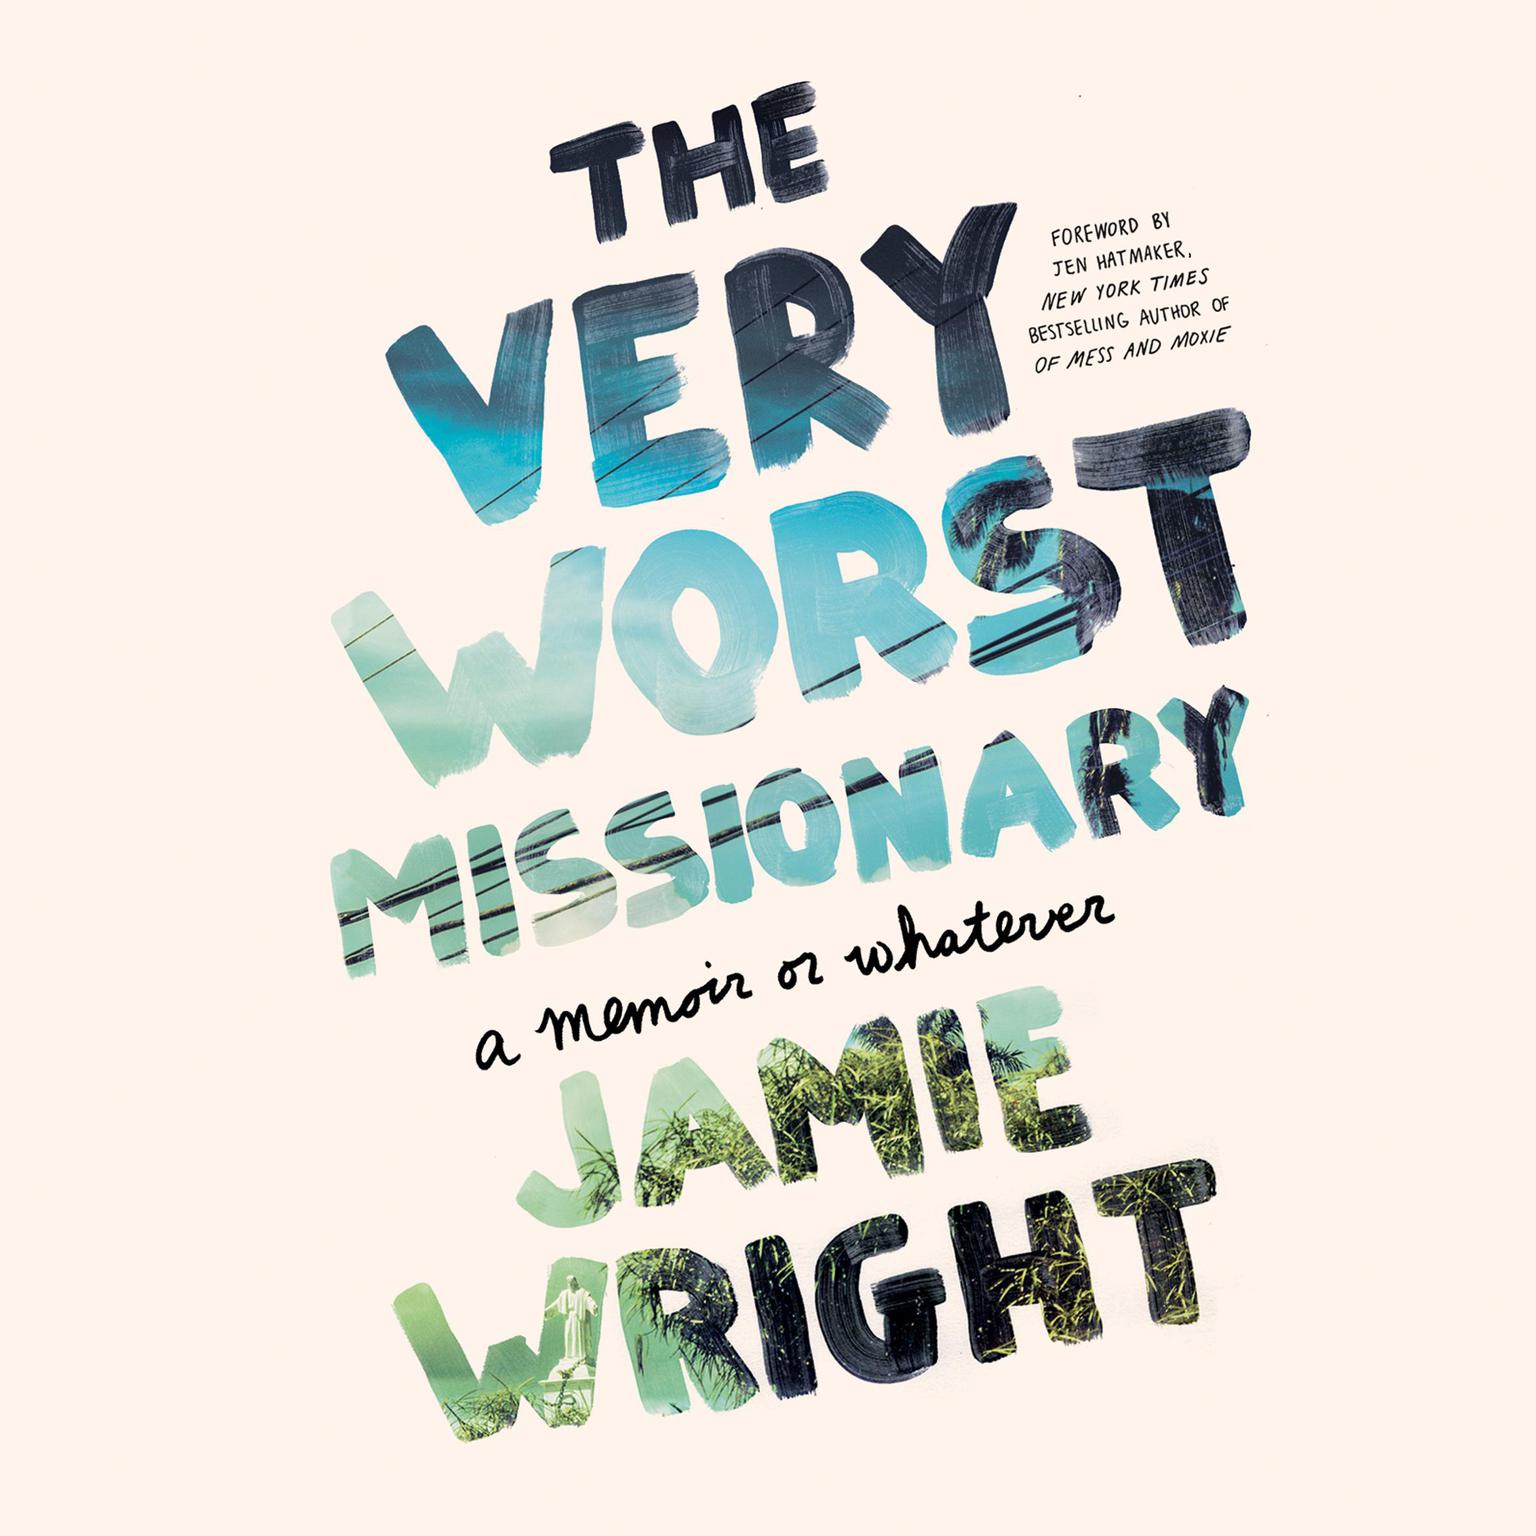 The Very Worst Missionary: A Memoir or Whatever Audiobook, by Jamie Wright